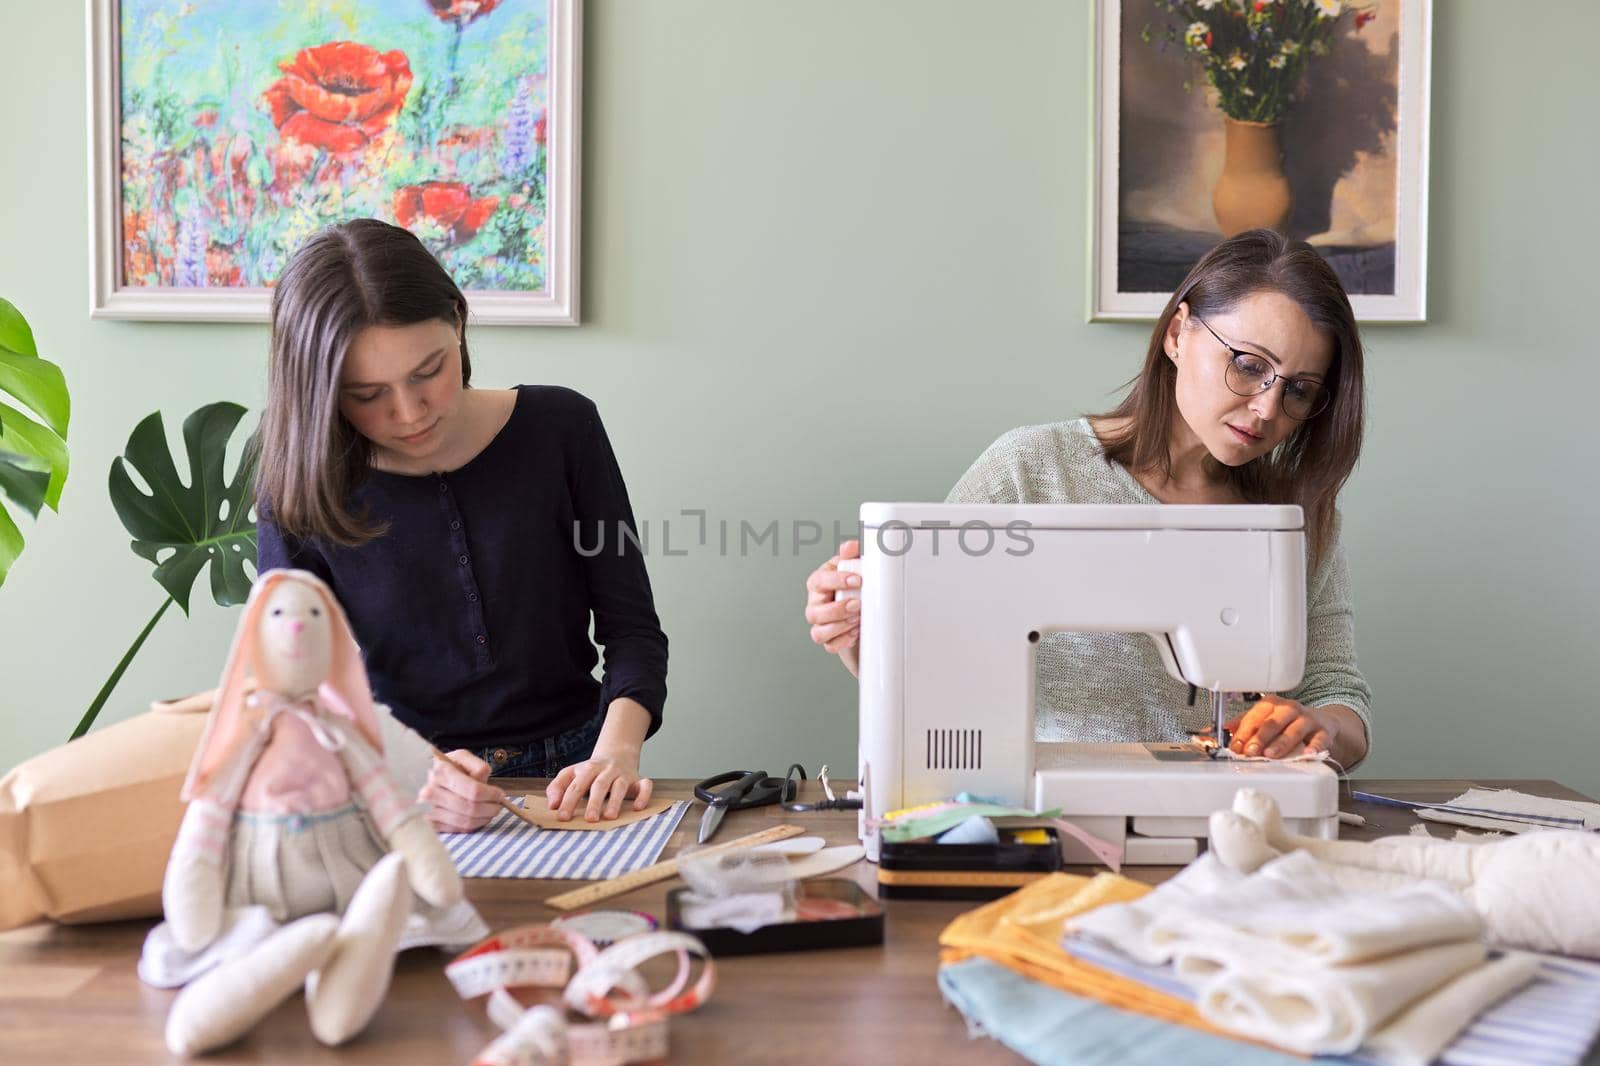 Family creative hand-made hobby and leisure, mother and teenager daughter together sew bunny toy doll. Woman teaches girl sewing skills, talking